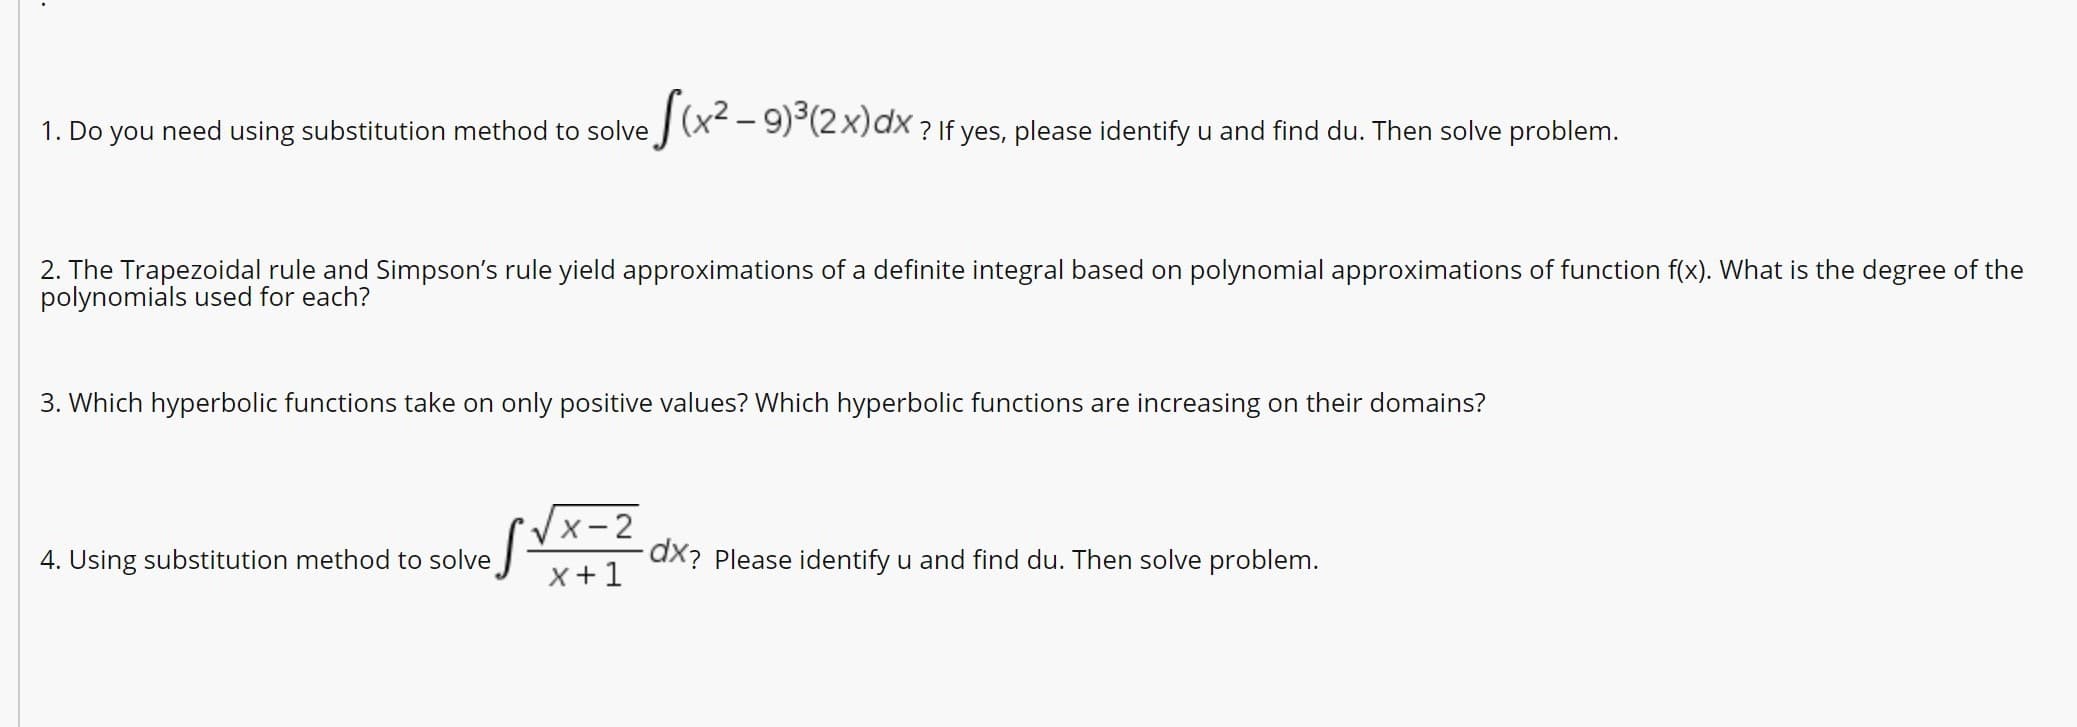 1. Do you need using substitution method to solve
(x2 – 9)(2x)dx ? If yes, please identify u and find du. Then solve problem.
